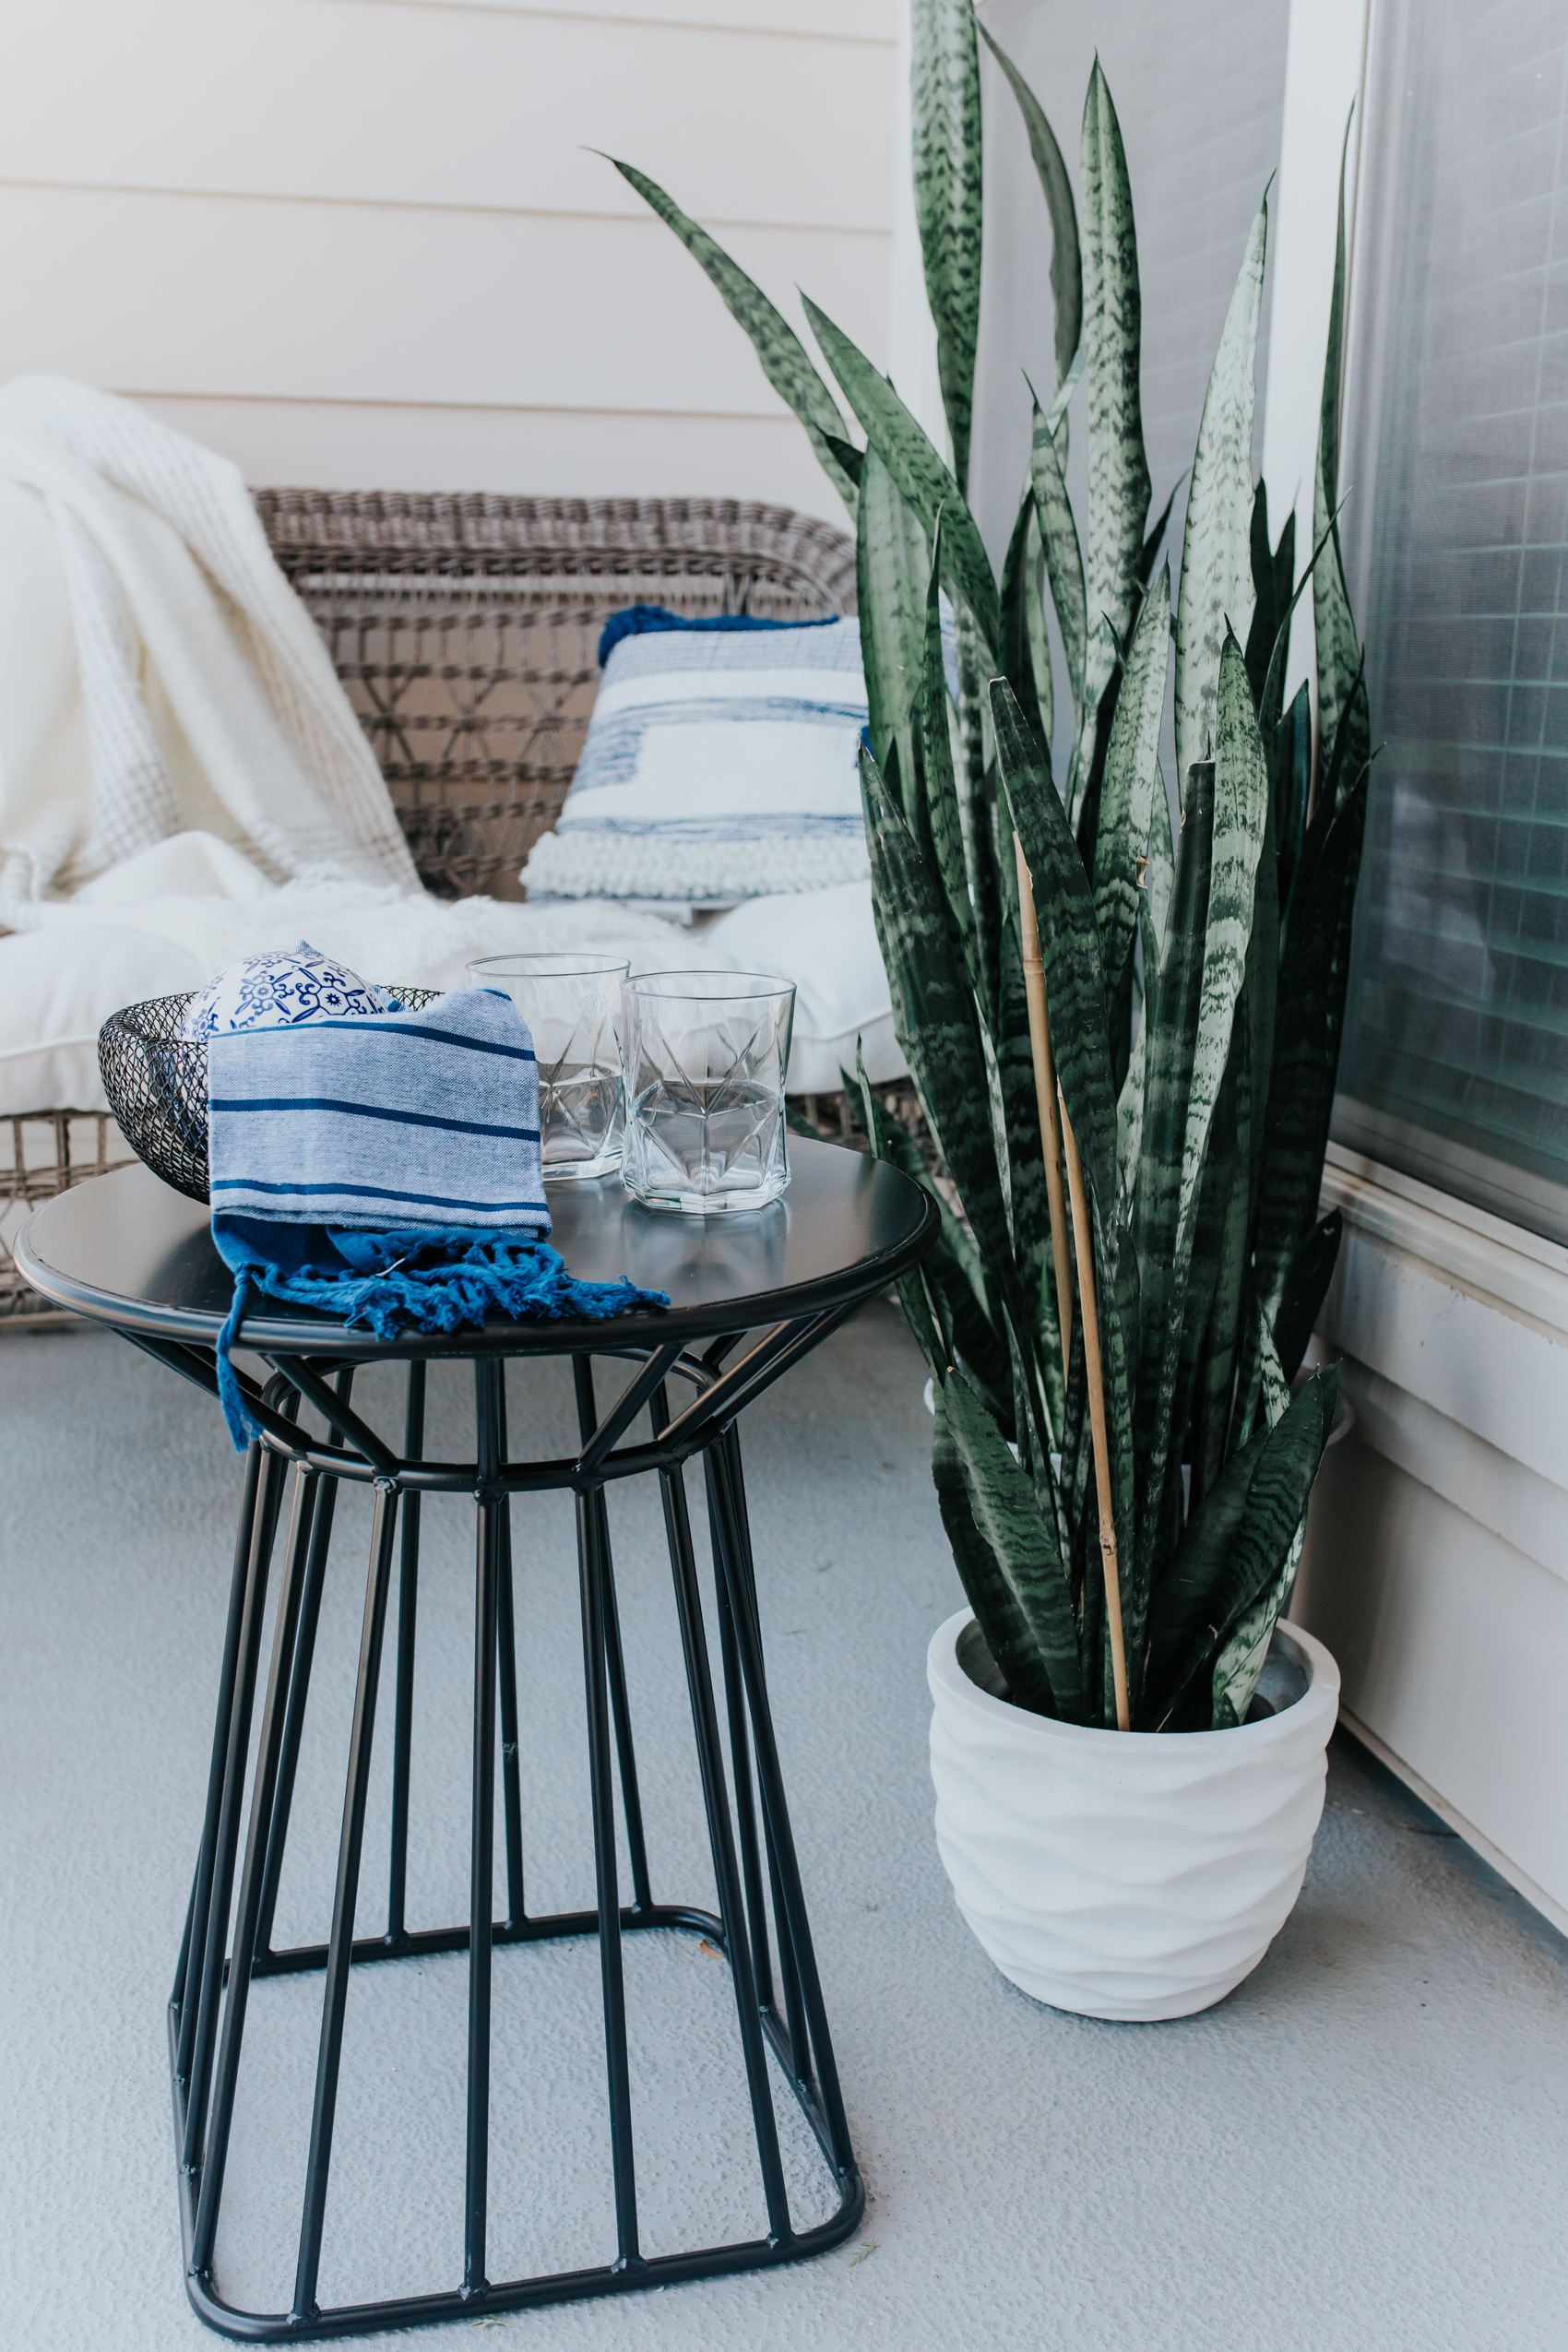 Dallas apartment balcony patio space with a gray metal table, snake plant and wicker sofa